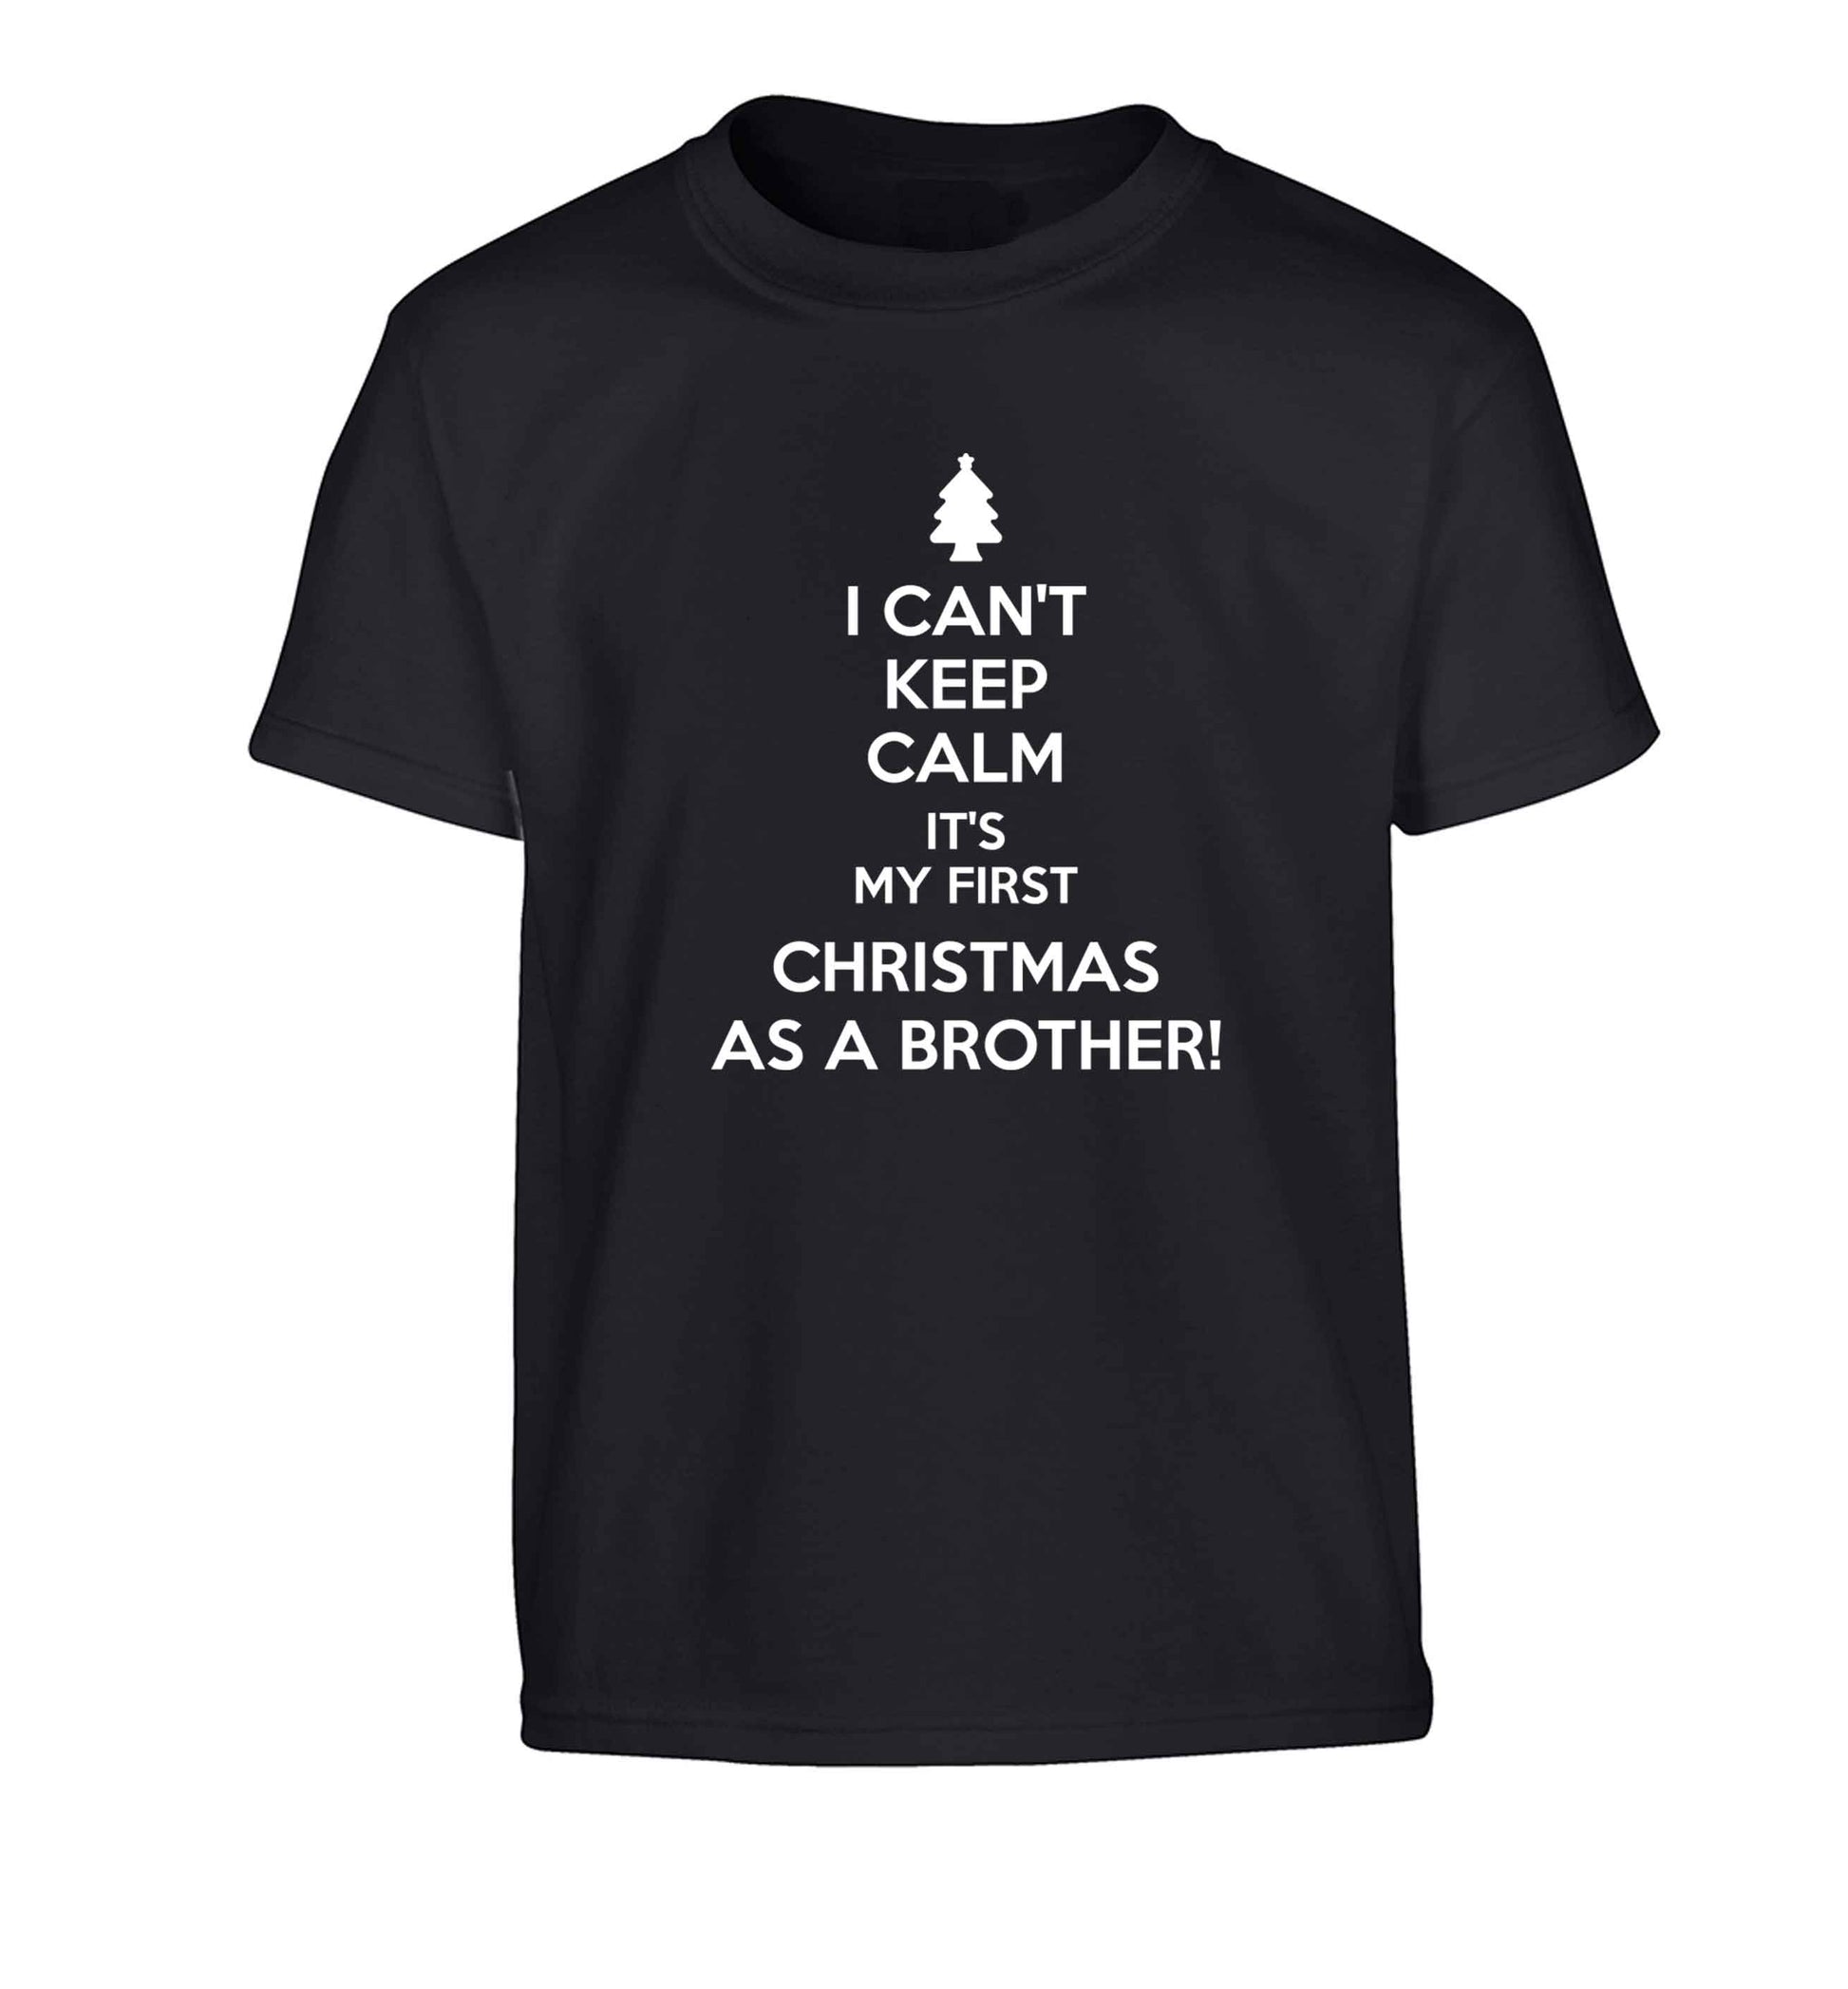 I can't keep calm it's my first Christmas as a brother! Children's black Tshirt 12-13 Years